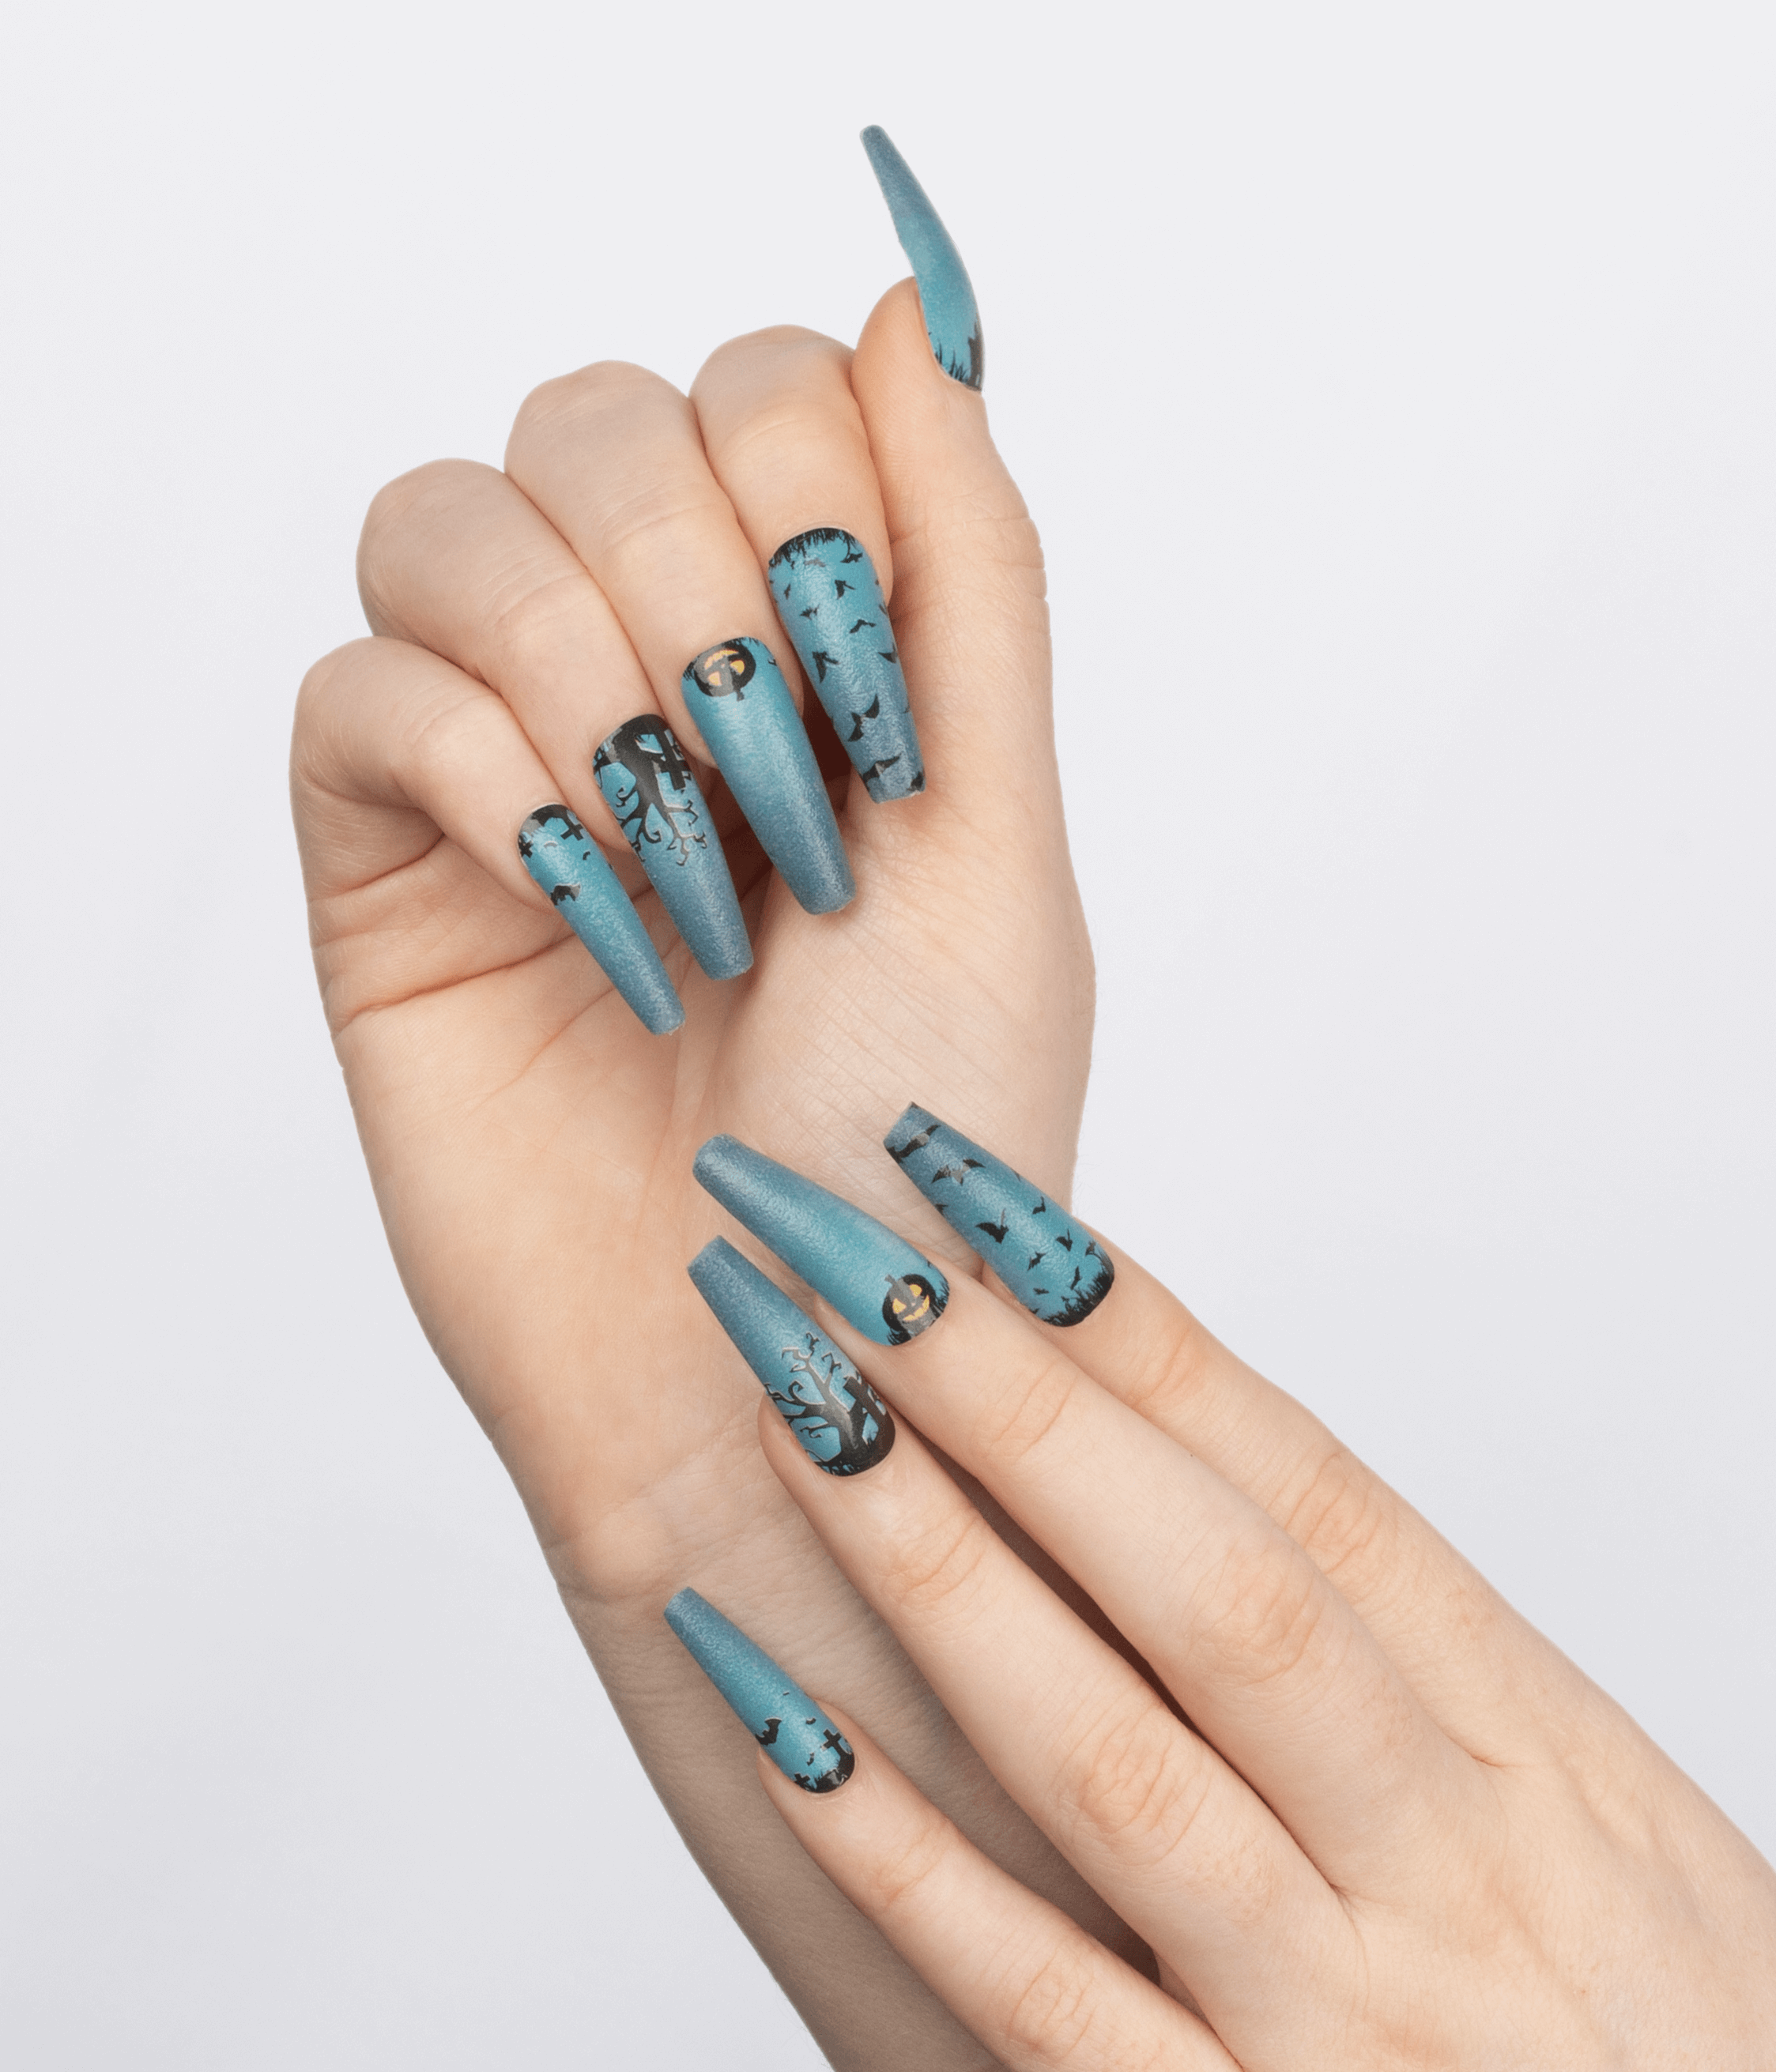 Get Lucky Nail Wraps Online Shop - Lily and Fox - Lily and Fox USA